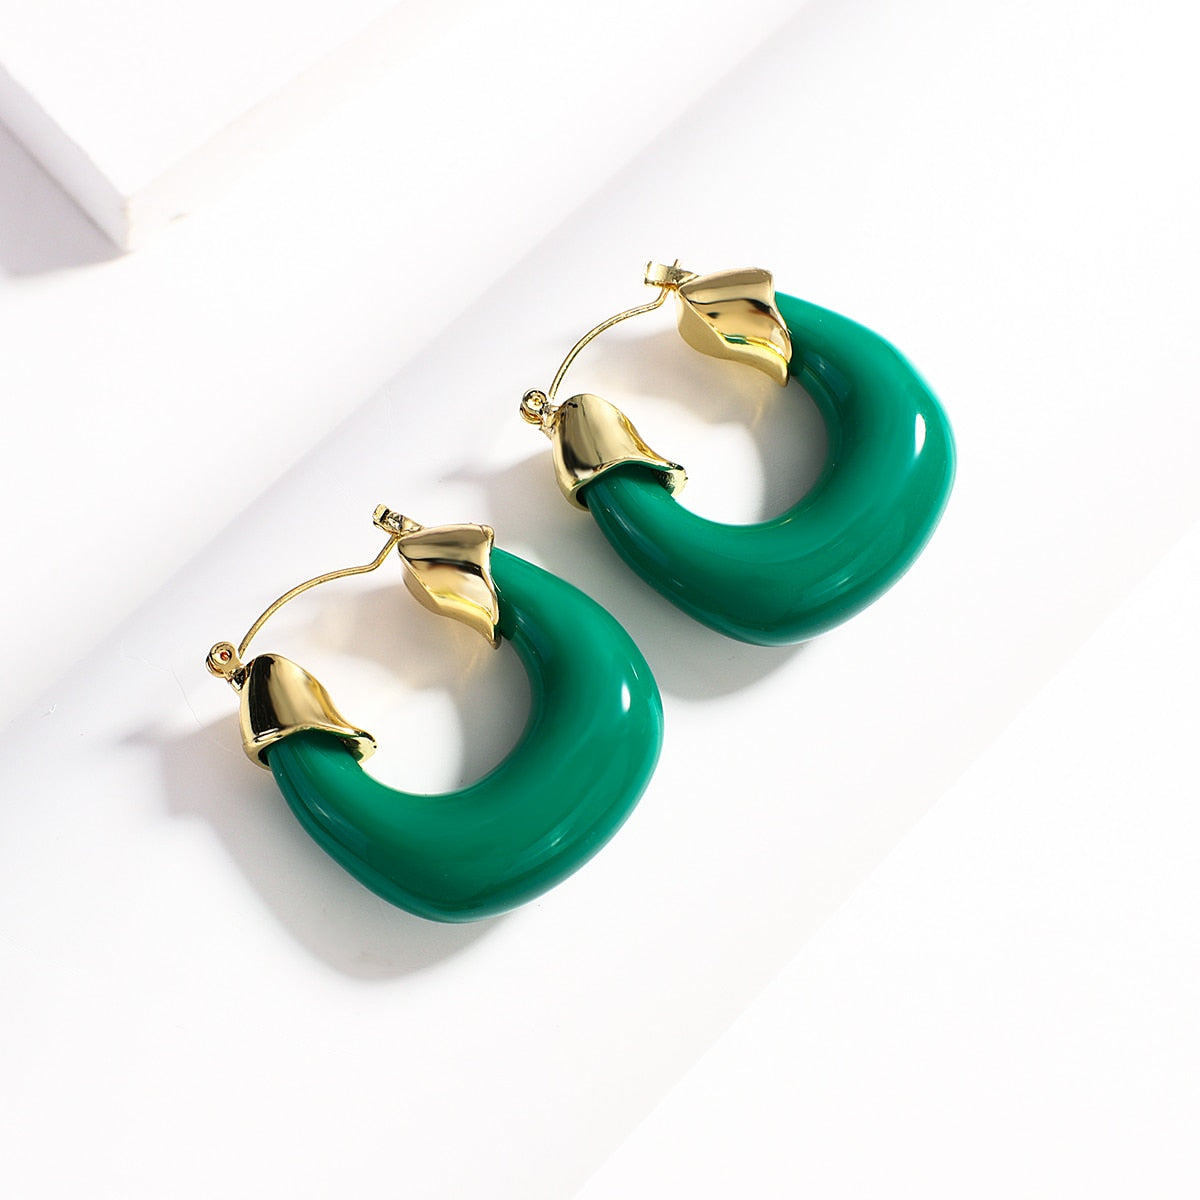 Green Acrylic Geometric Dangle Earrings with Round and Square Shapes